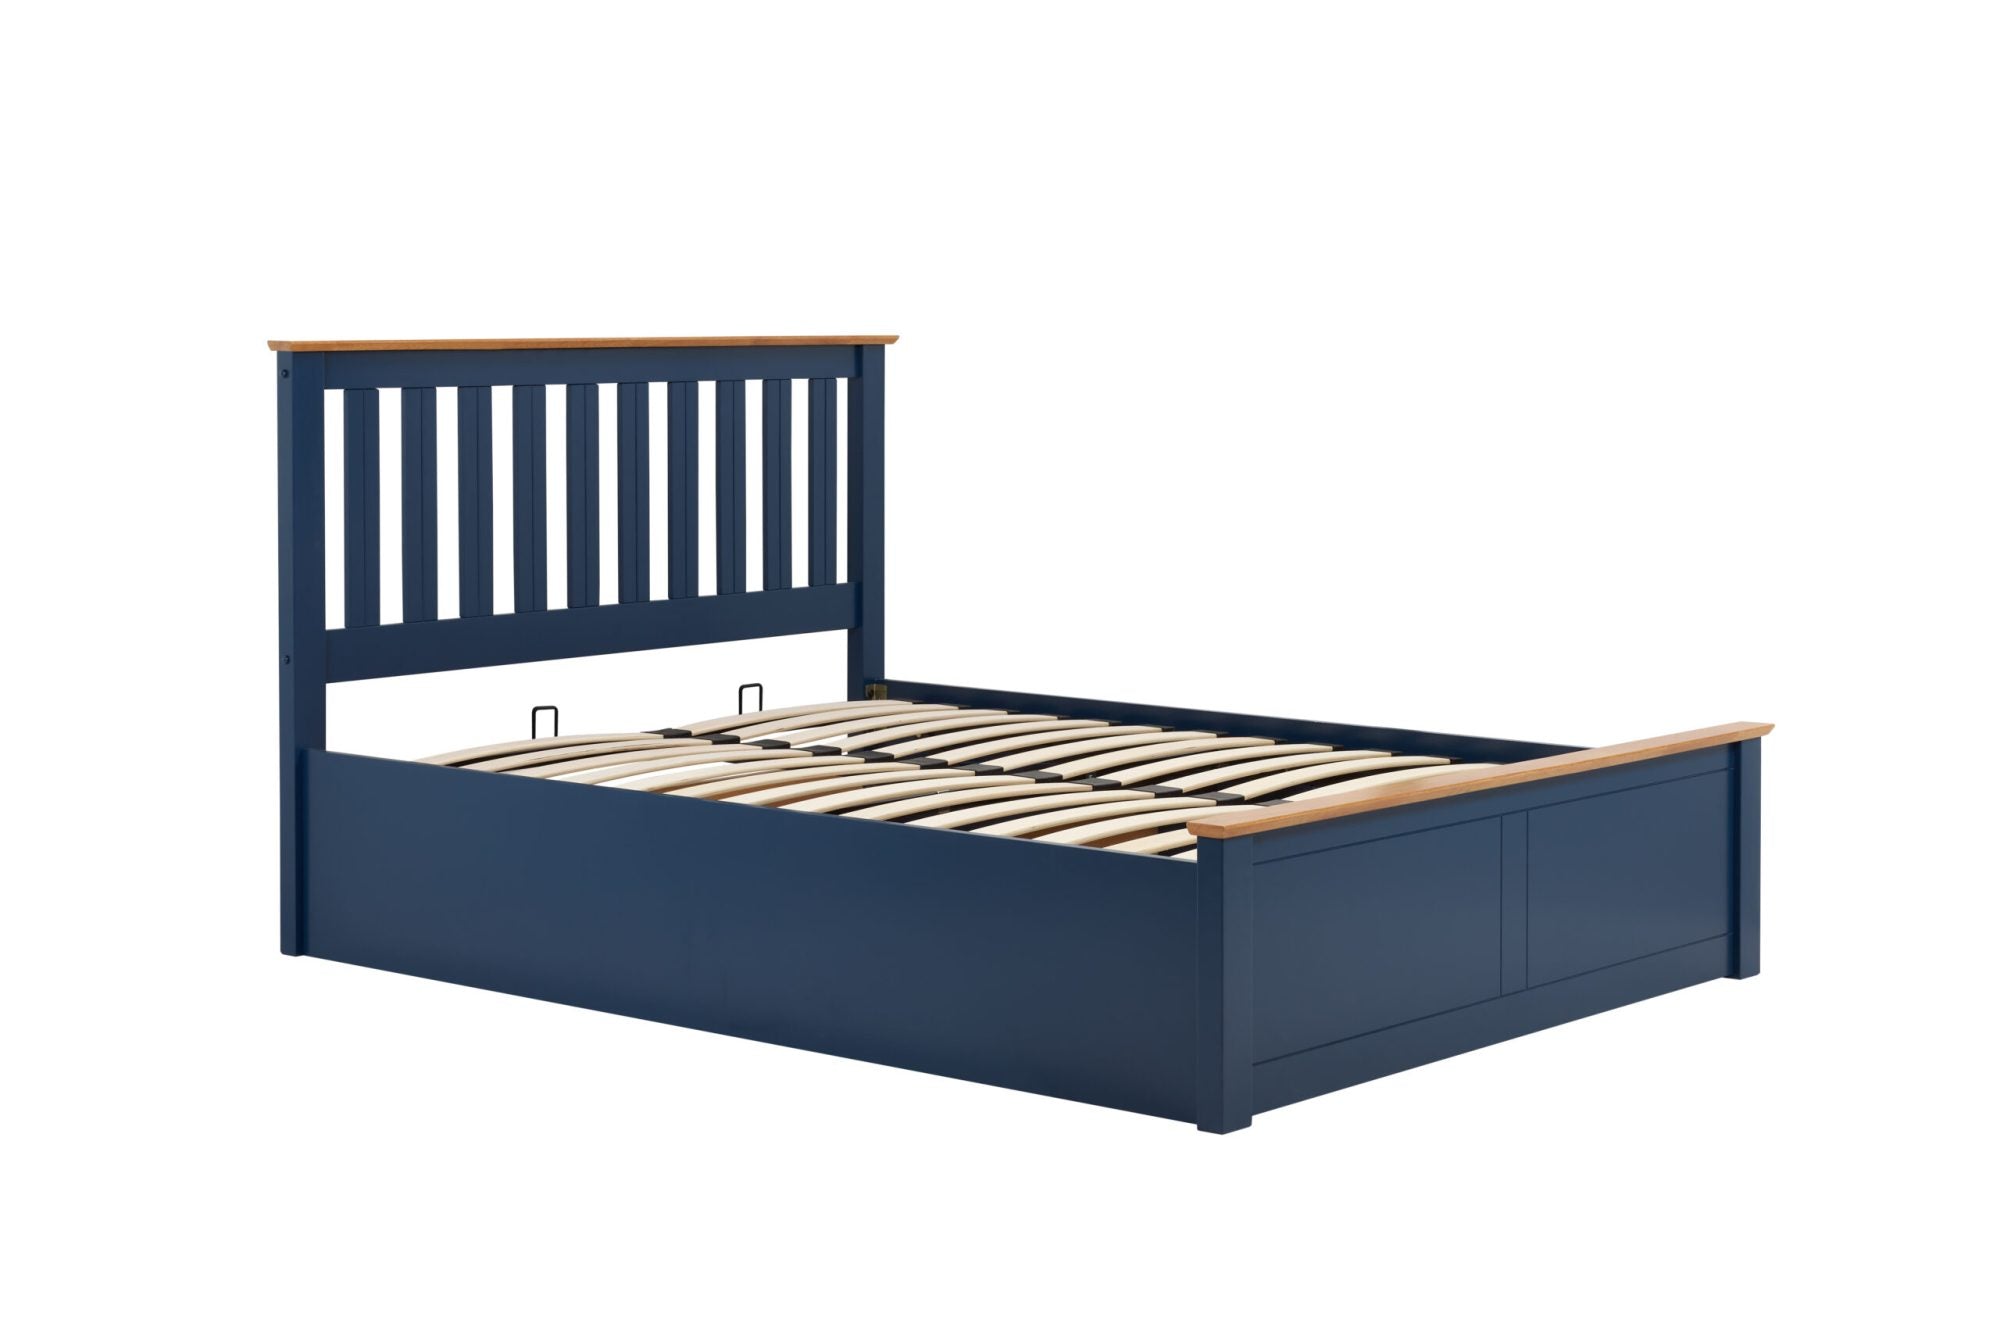 GroveCraft Blue Wooden Ottoman Bed Frame